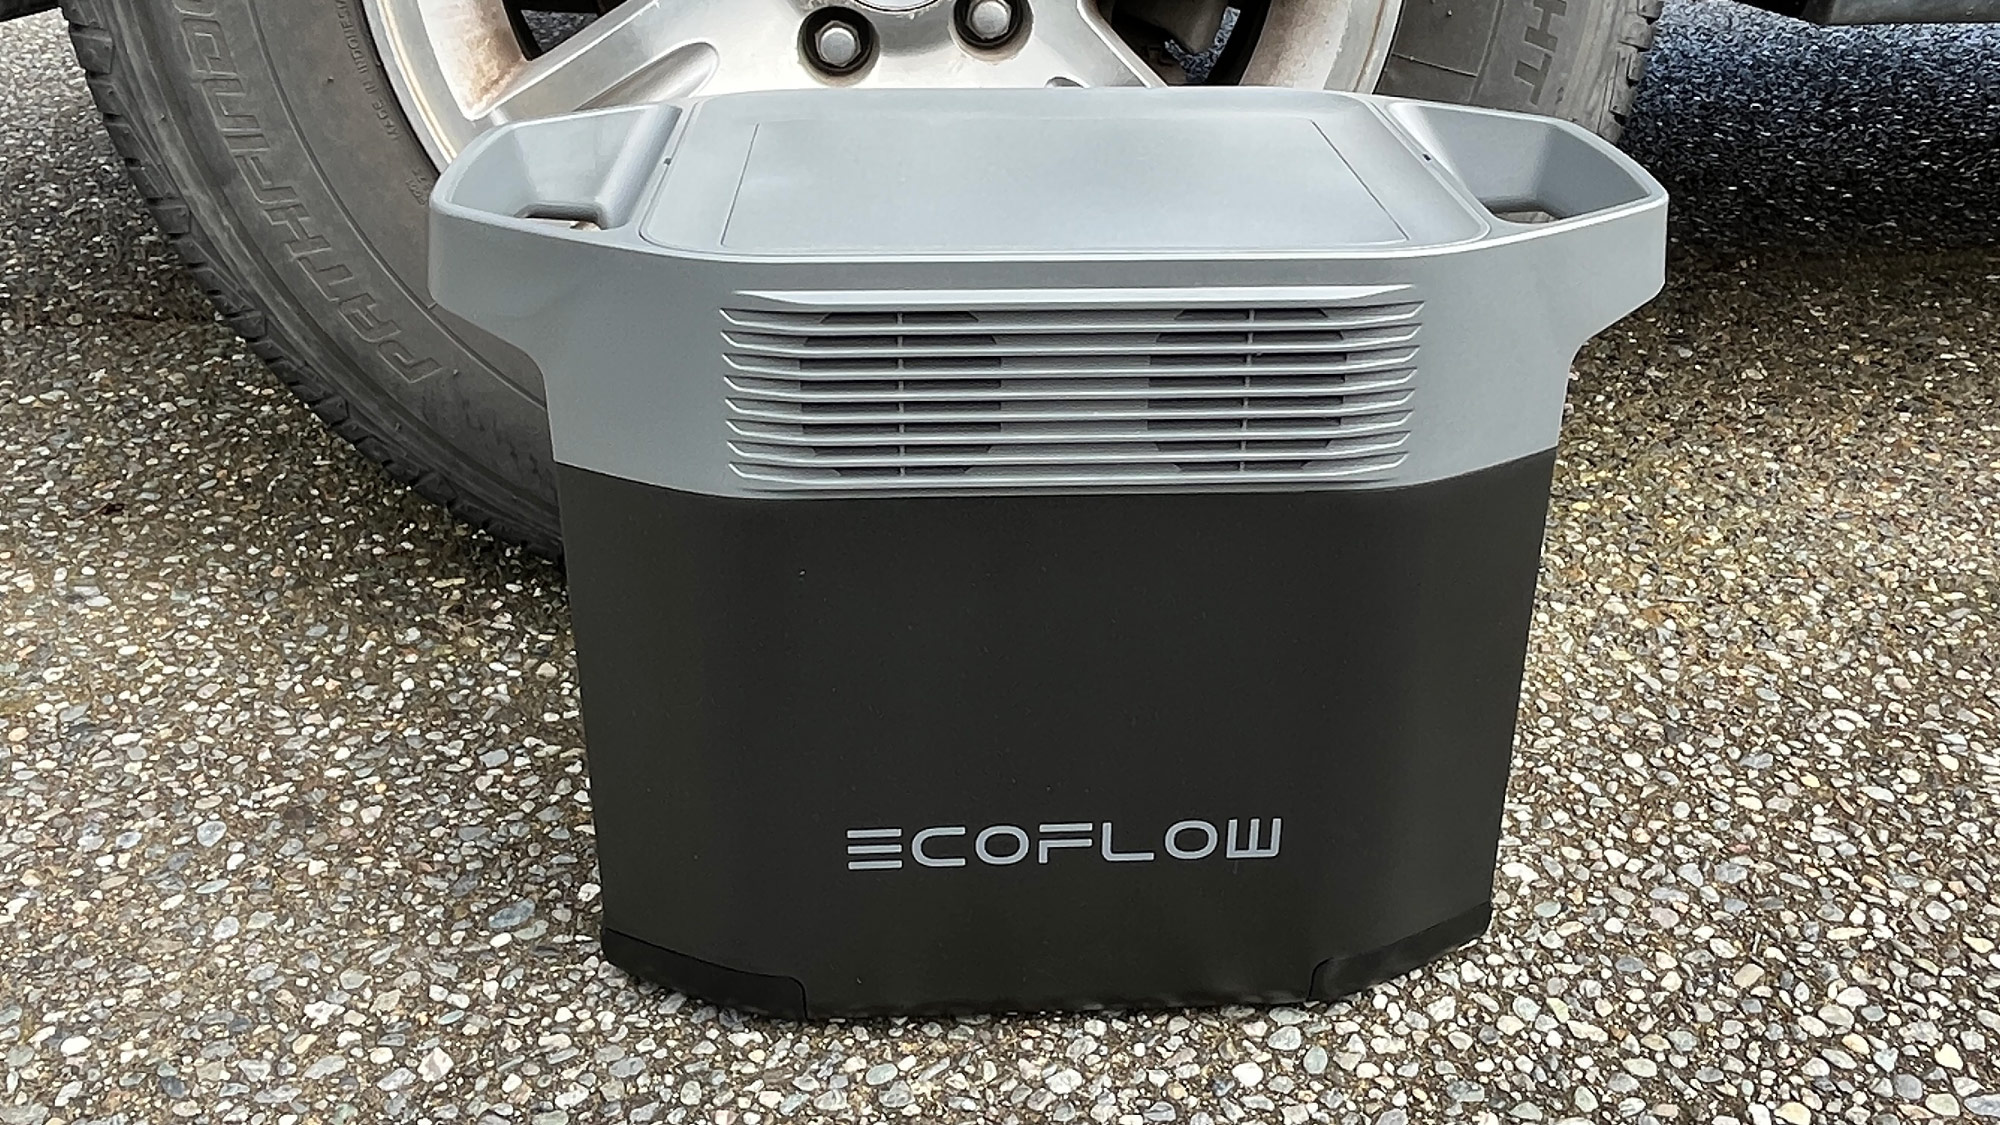 EcoFlow on LinkedIn: We are pleased to share with you that